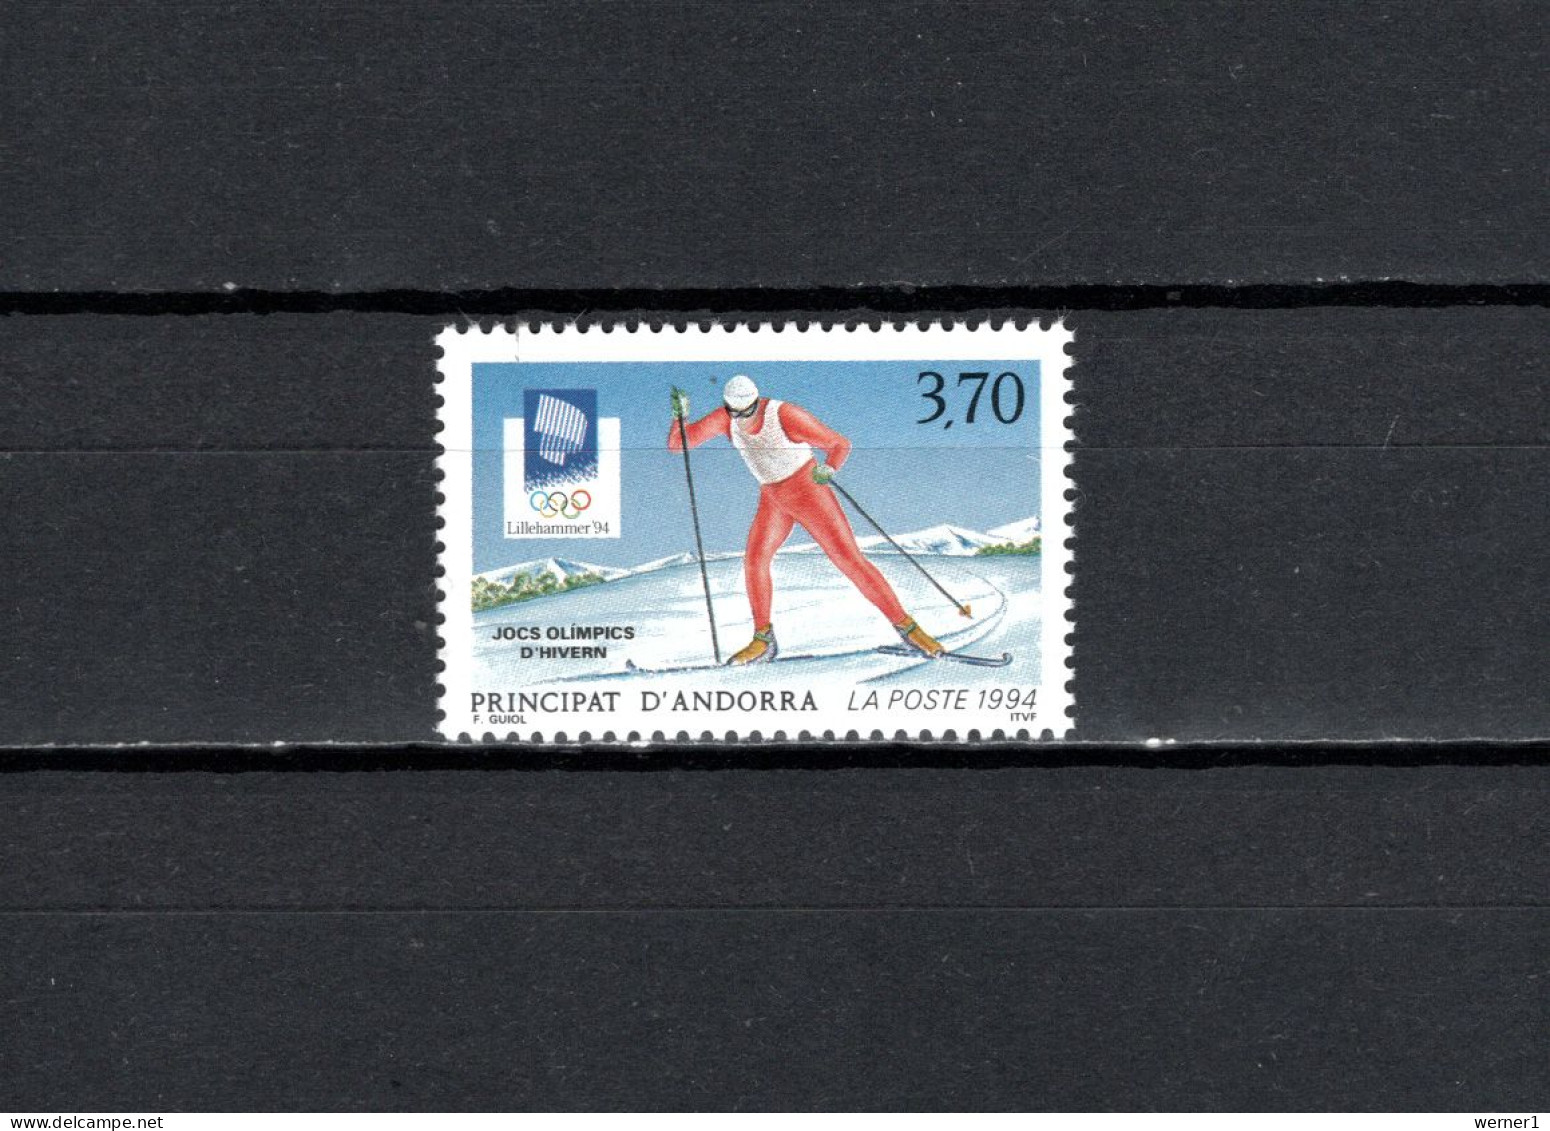 Andorra French 1994 Olympic Games Lillehammer Stamp MNH - Invierno 1994: Lillehammer